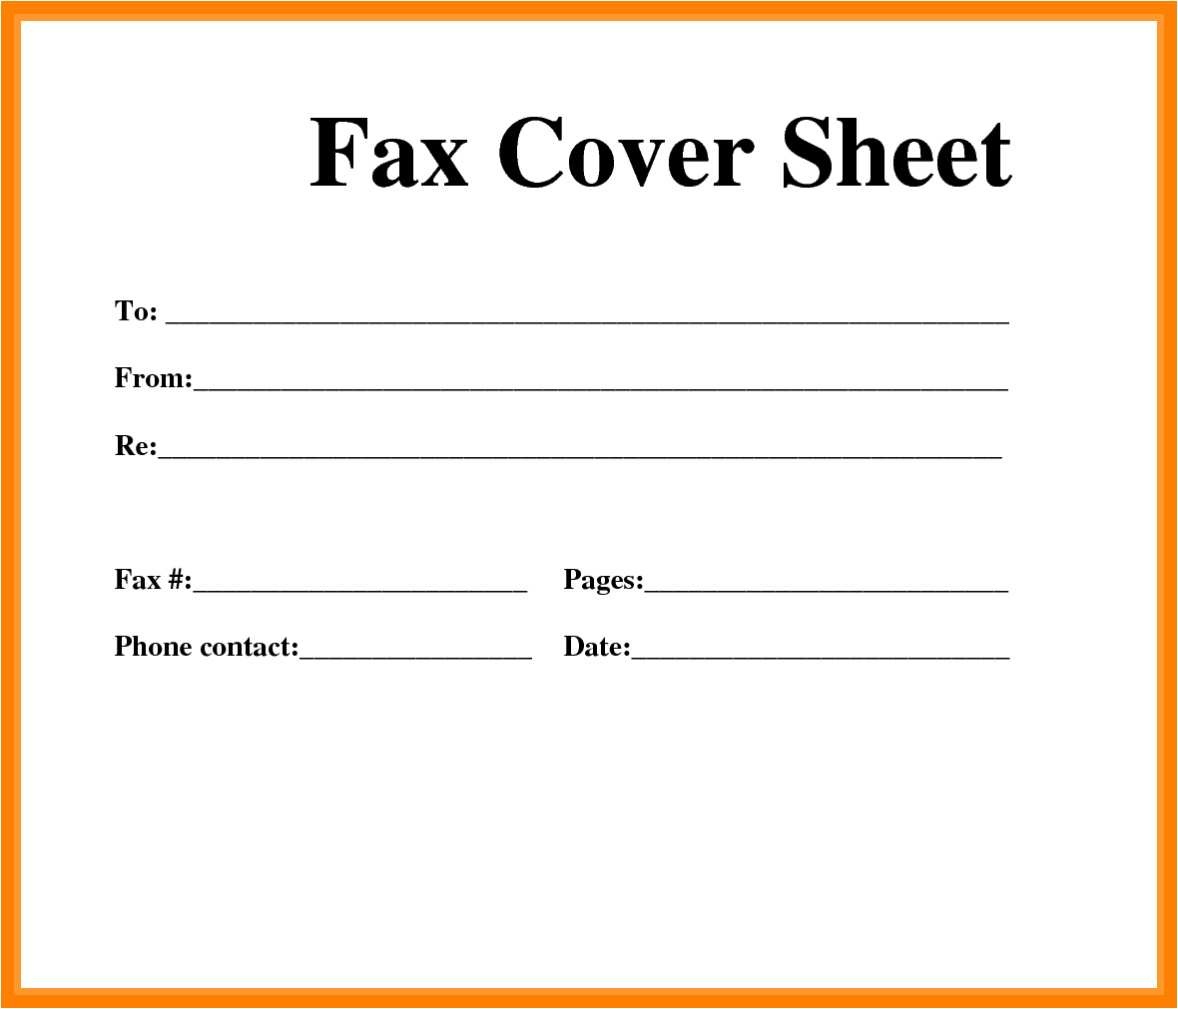 53 Fresh Fax Cover Sheet Template Word 2013 - All About Resume - Free Printable Fax Cover Sheet